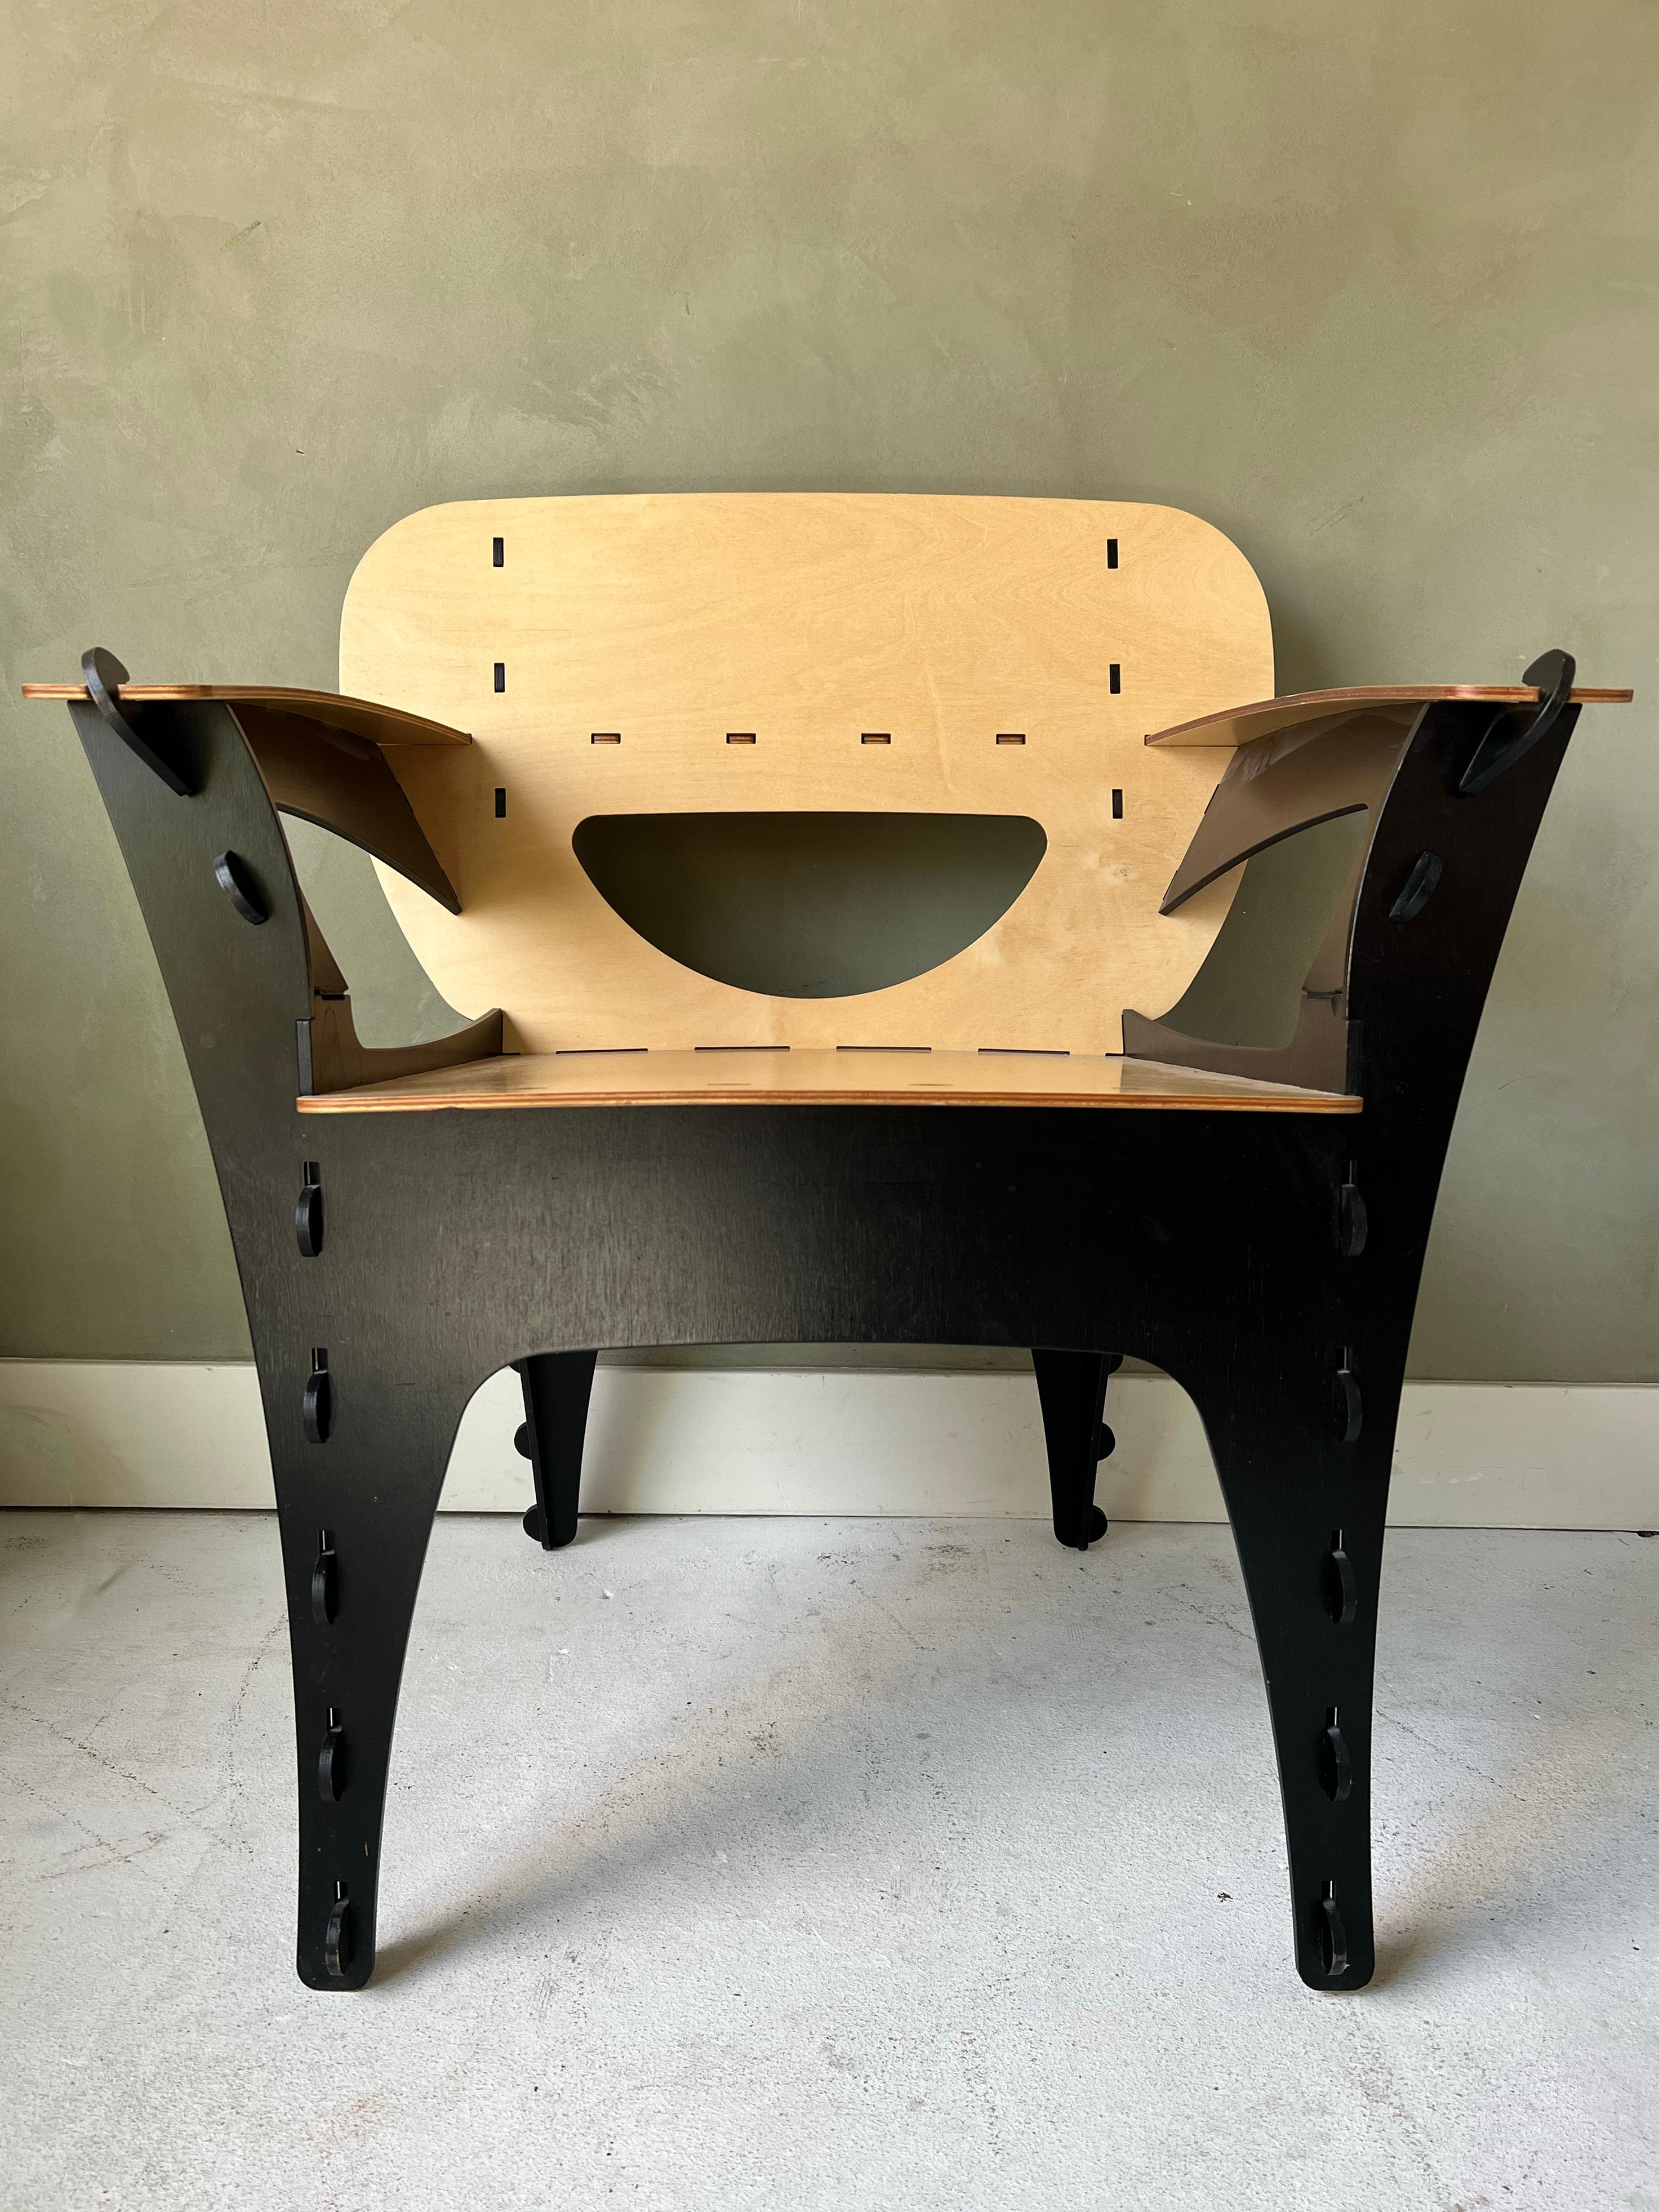 Vintage Puzzle chair by David Kawecki. In great condition with just a few small chips on the legs. Black and natural color combination. Solid construction and a great conversation piece.